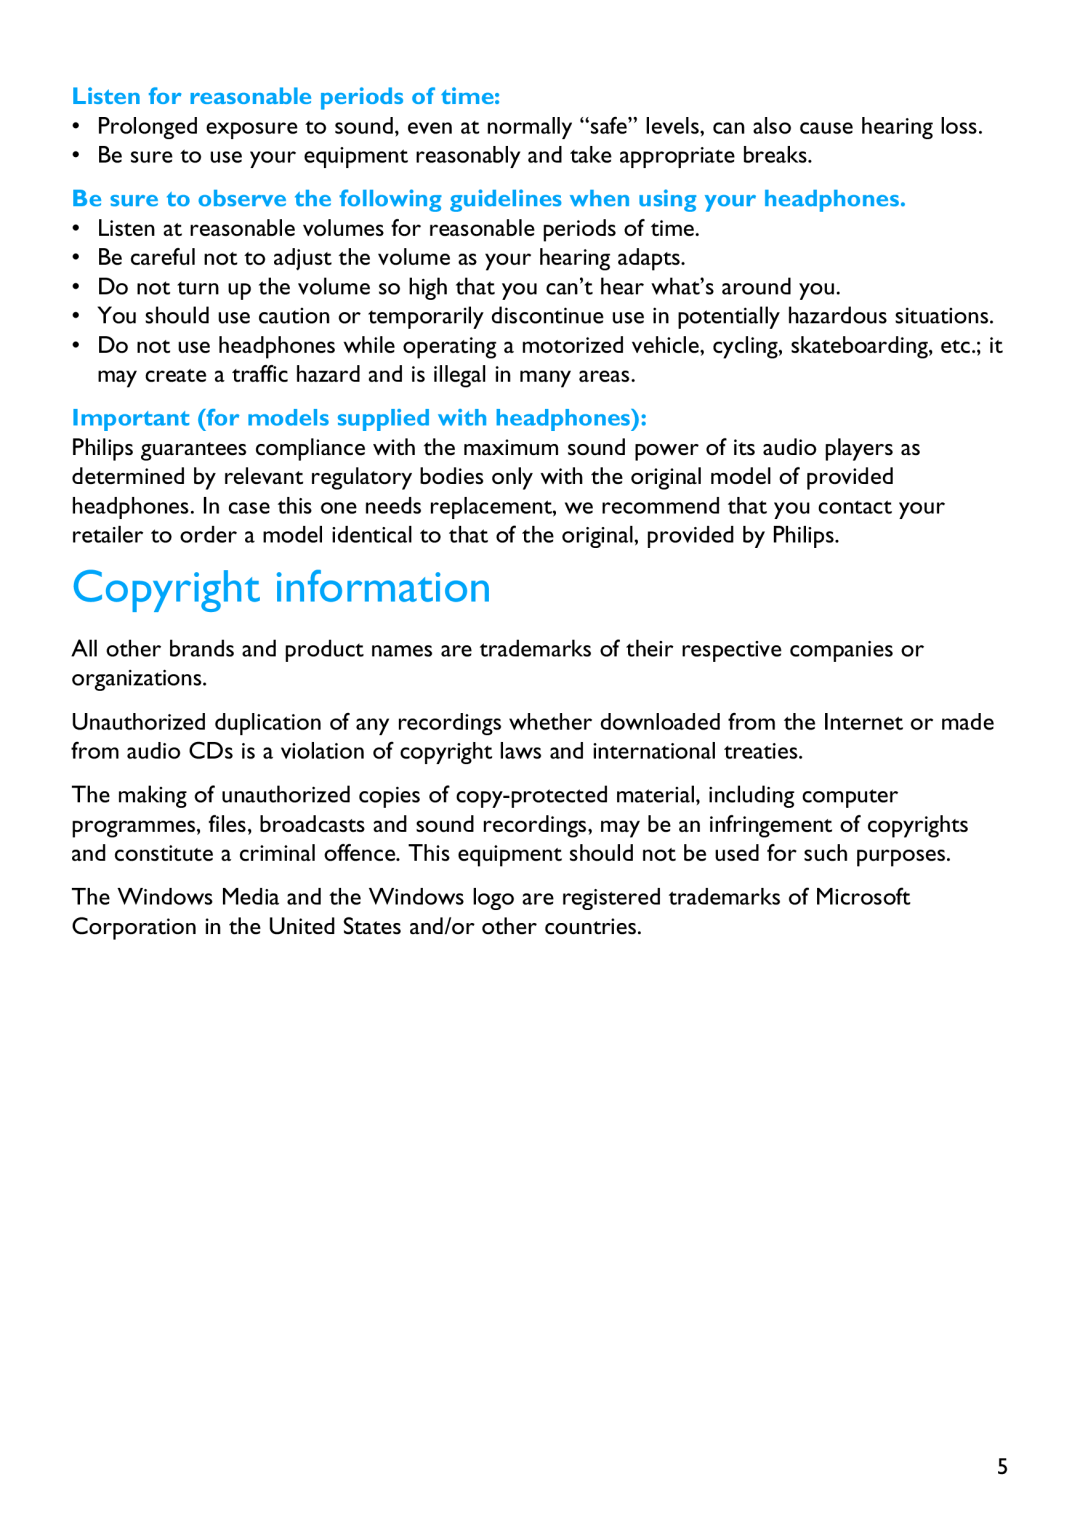 Philips SA2200 Copyright information, Listen for reasonable periods of time, Important for models supplied with headphones 